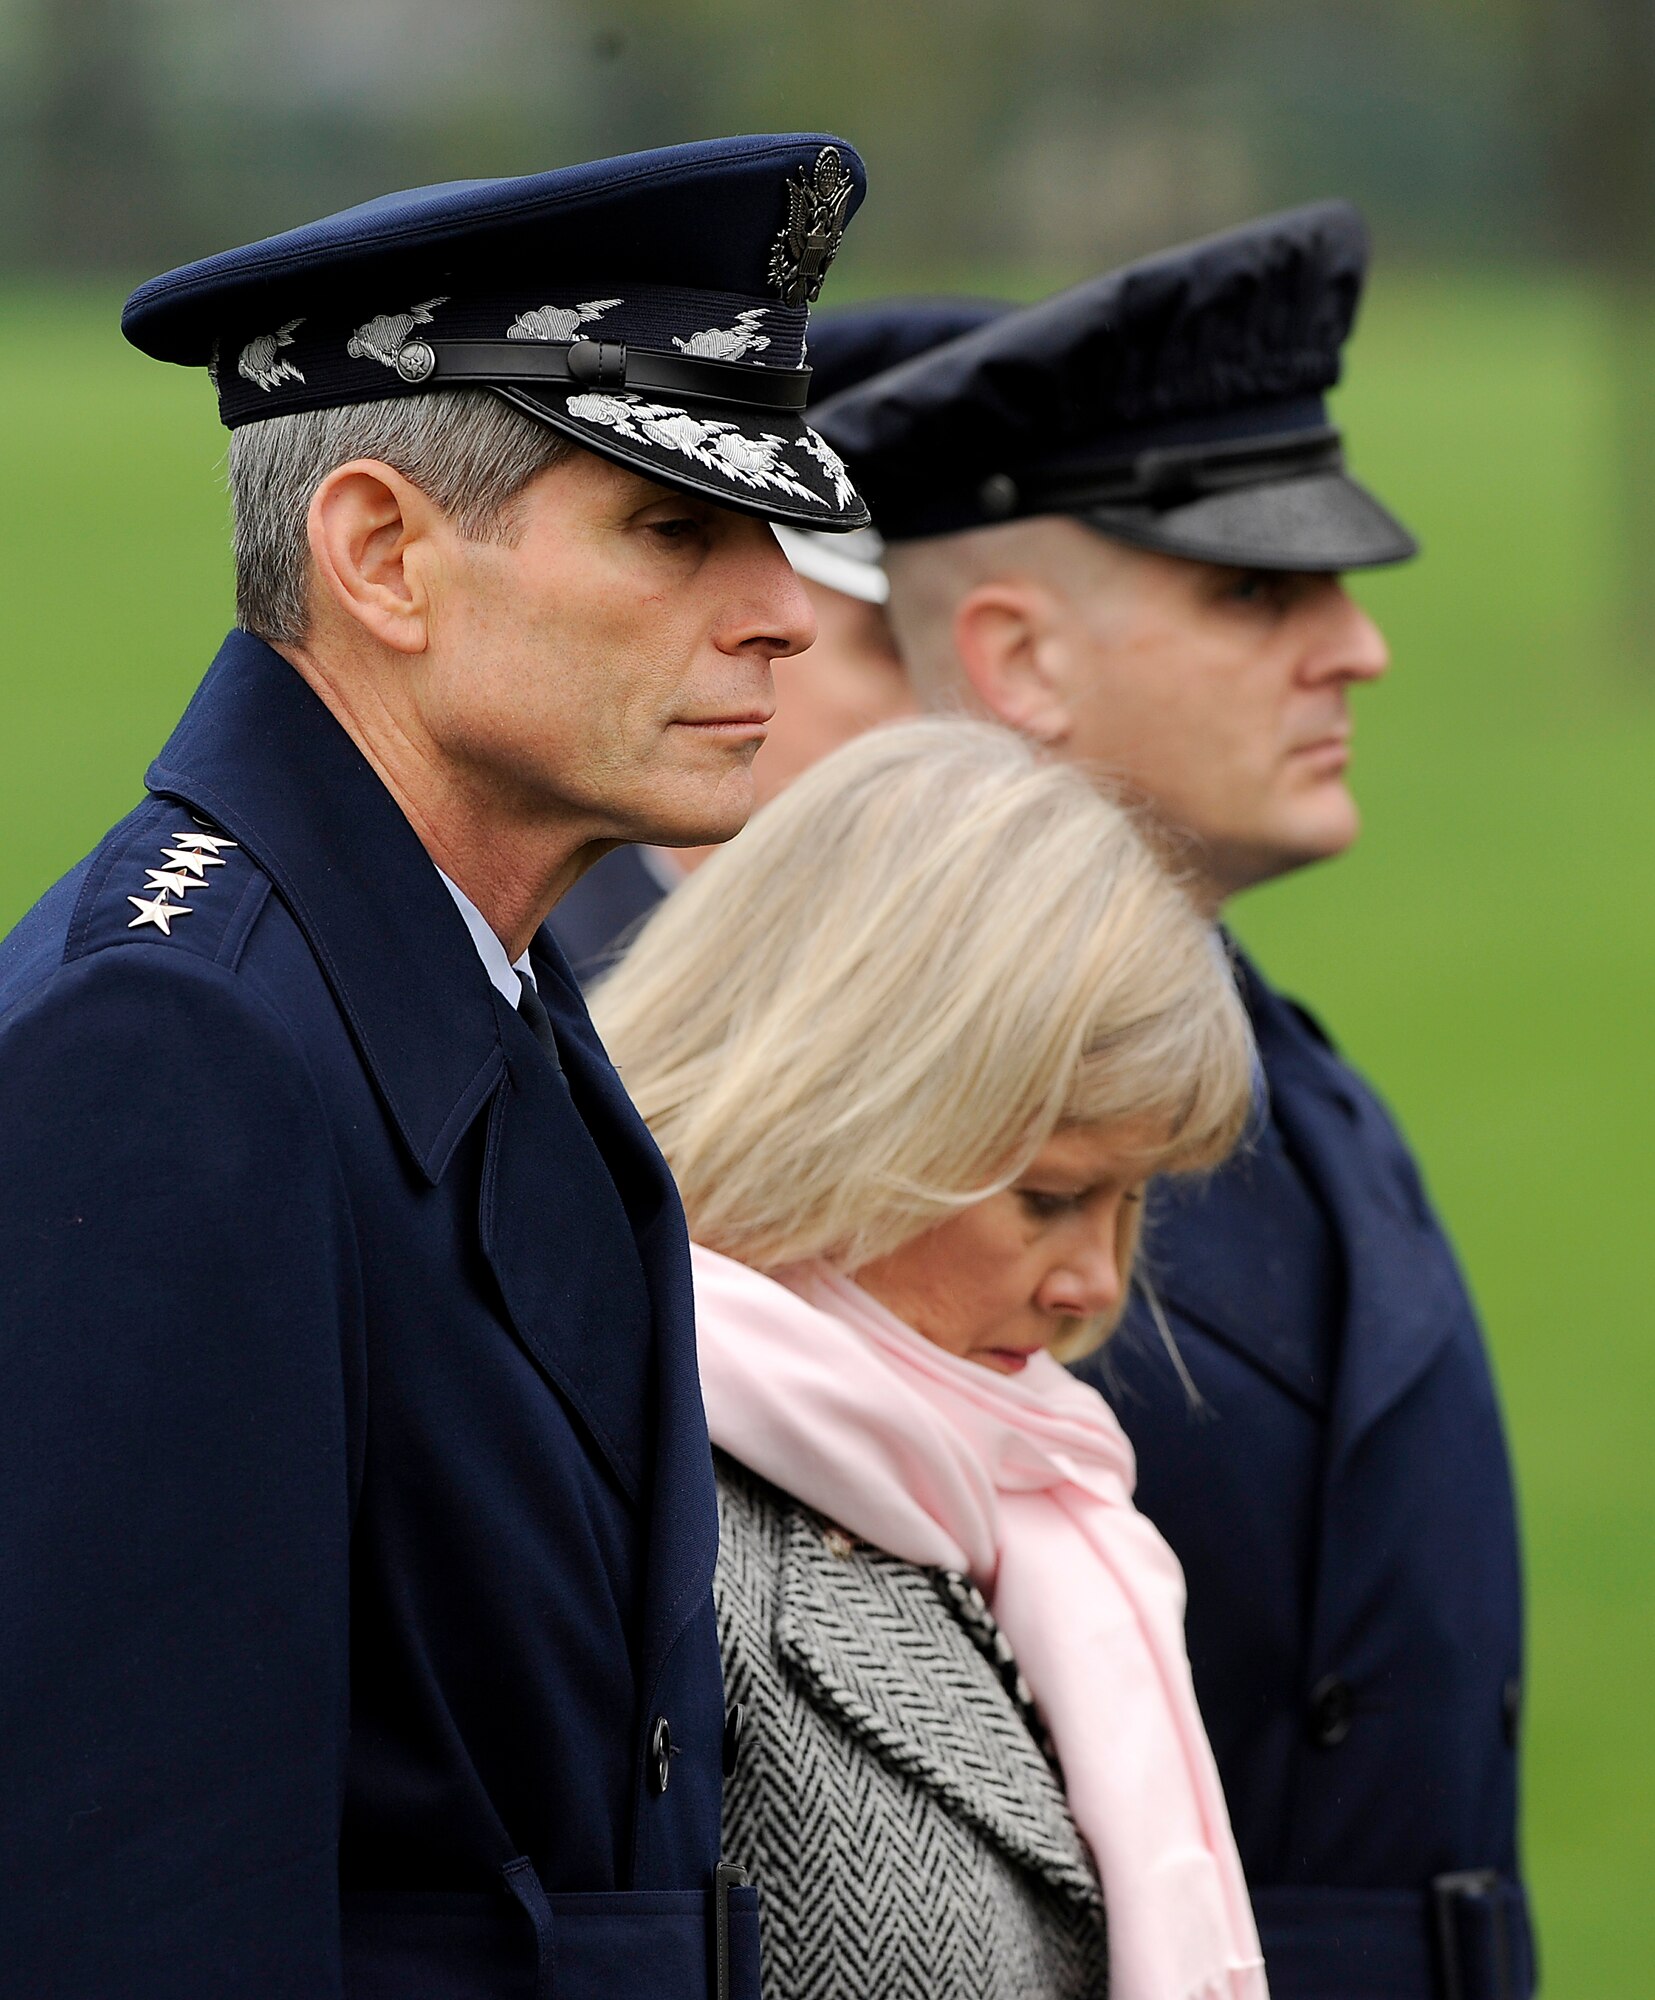 Air Force Chief of Staff Gen. Norton Schwartz, his wife Suzie and Master Sgt. Charles Mercurio, from the Air Force District of Washington Ceremonies and Protocol office, honor Maj. Gen. Jeanne M. Holm during her burial March 29, 2010, at Arlington National Cemetery. General Holm was promoted to major general with an effective date of July 1, 1970, and was the first woman in the Armed Services to serve in that grade.  (U.S. Air Force photo/Scott M. Ash)